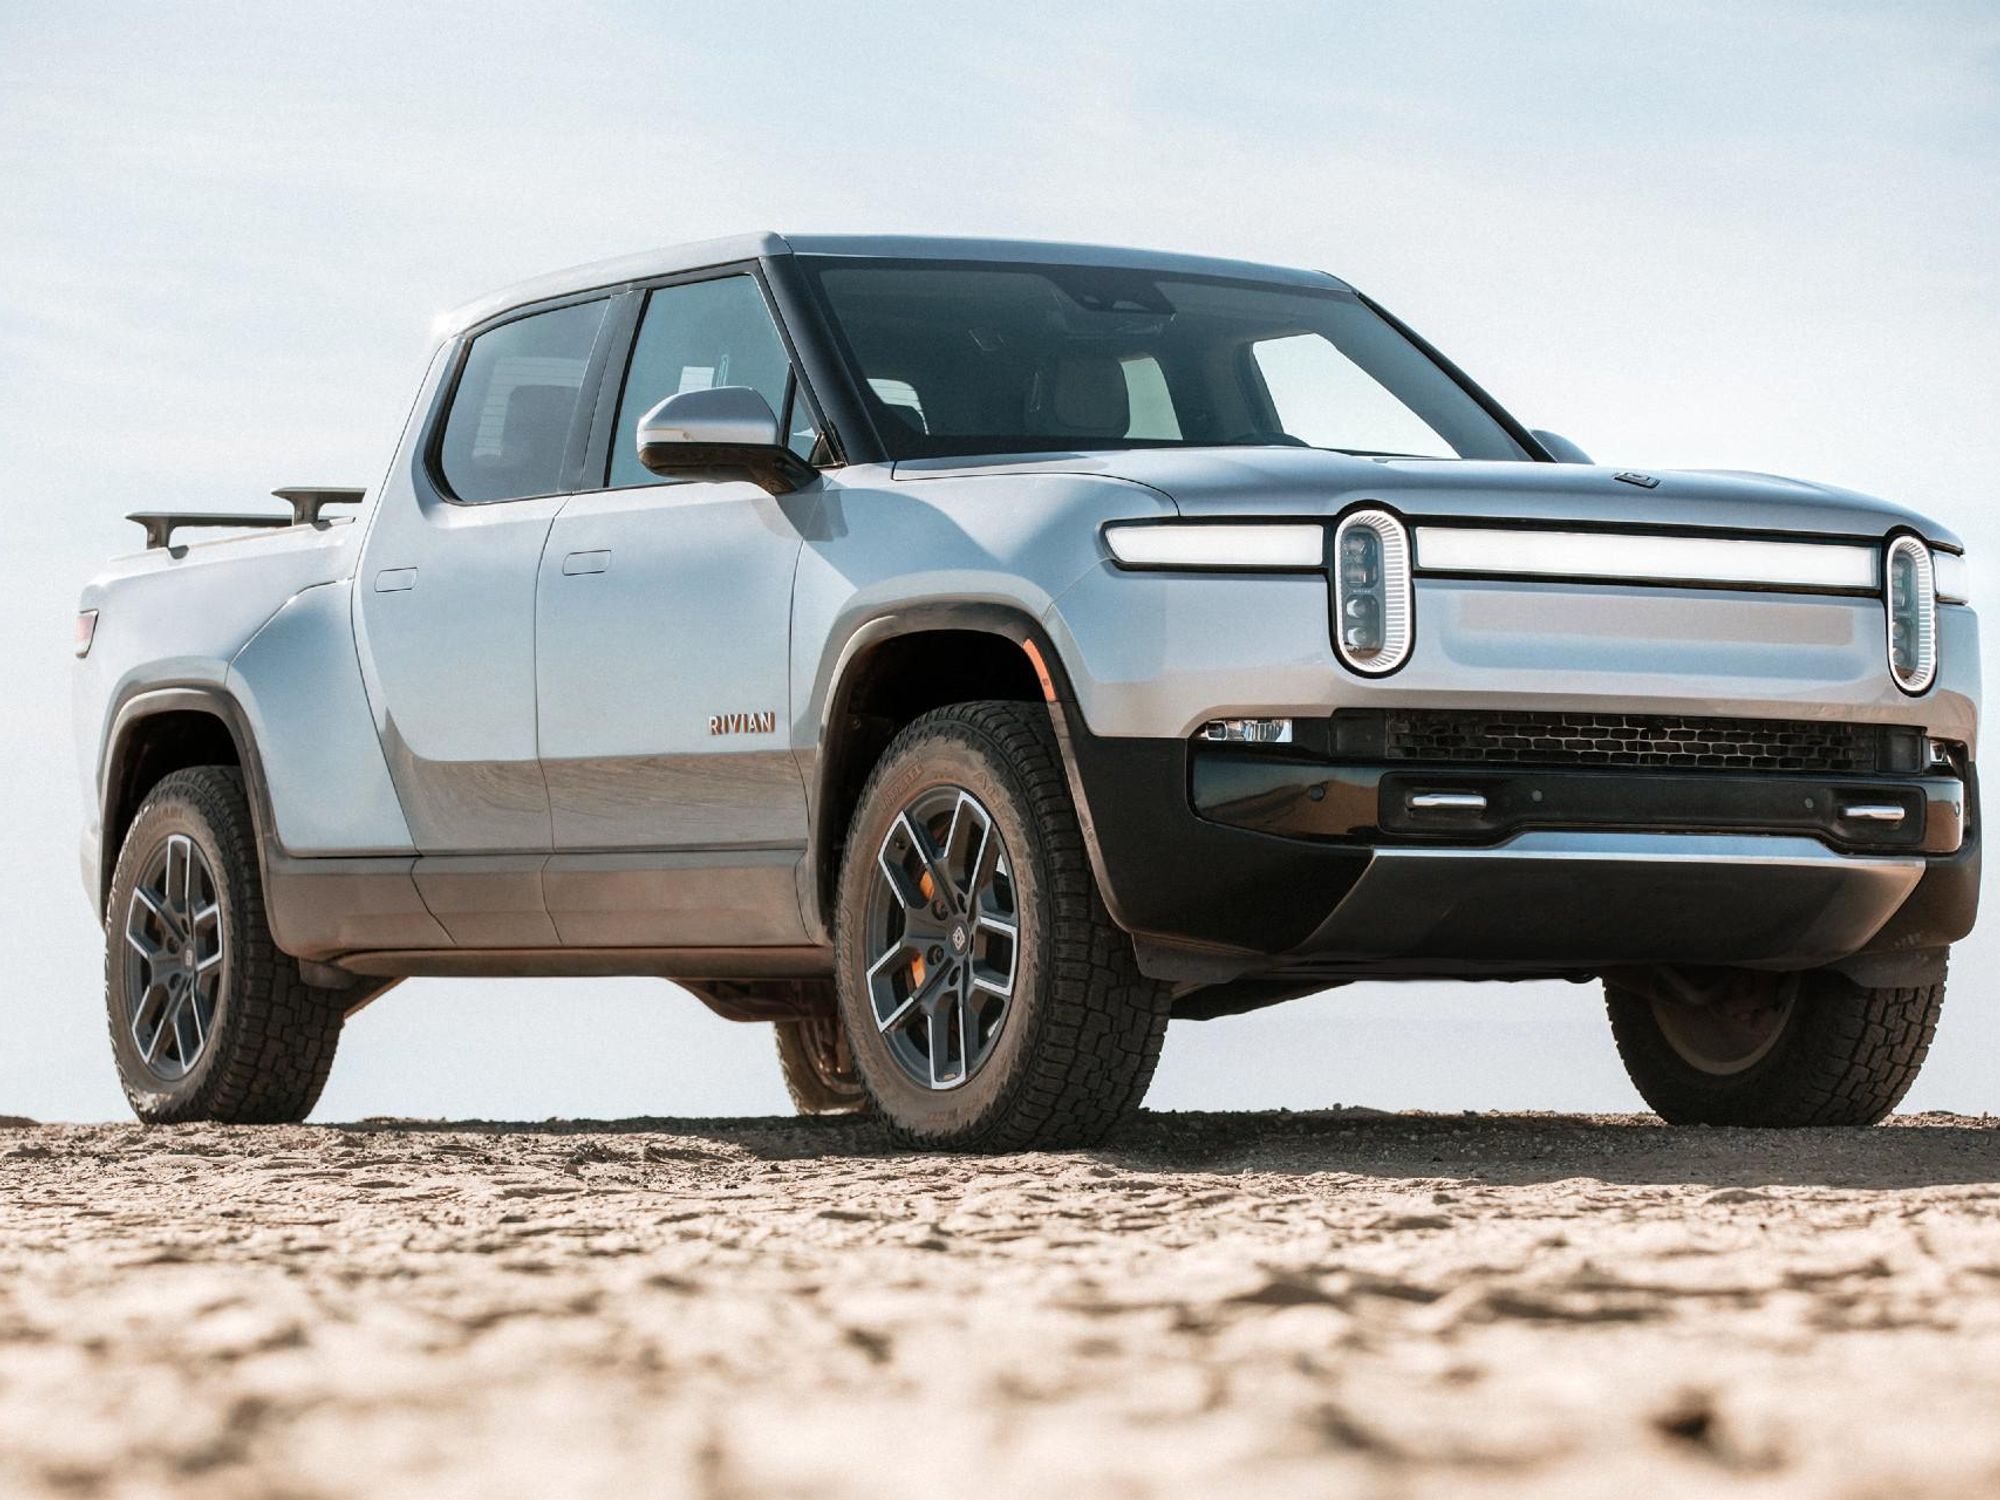 Rivian Gives Insight into Delivery Windows for R1T and R1S Electric Vehicles